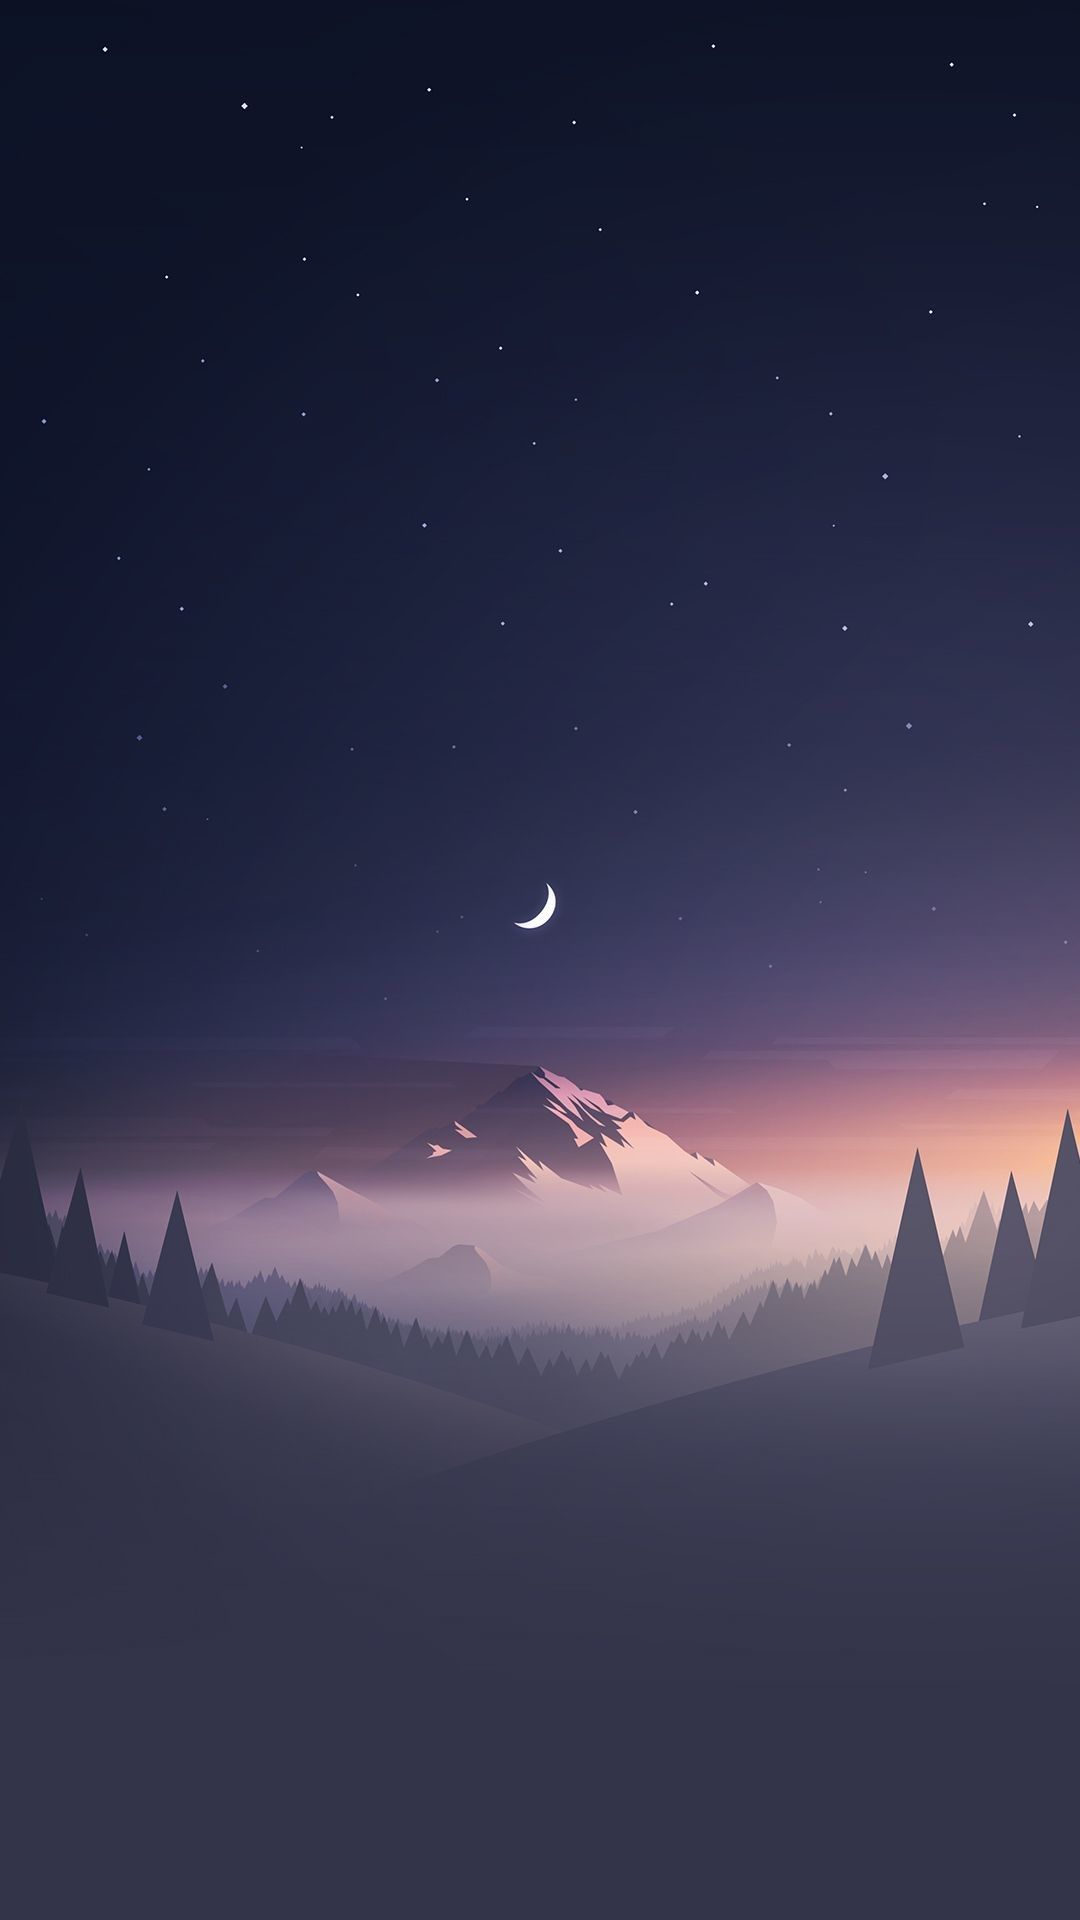 Top Iphone Wallpapers posted by Samantha Peltier